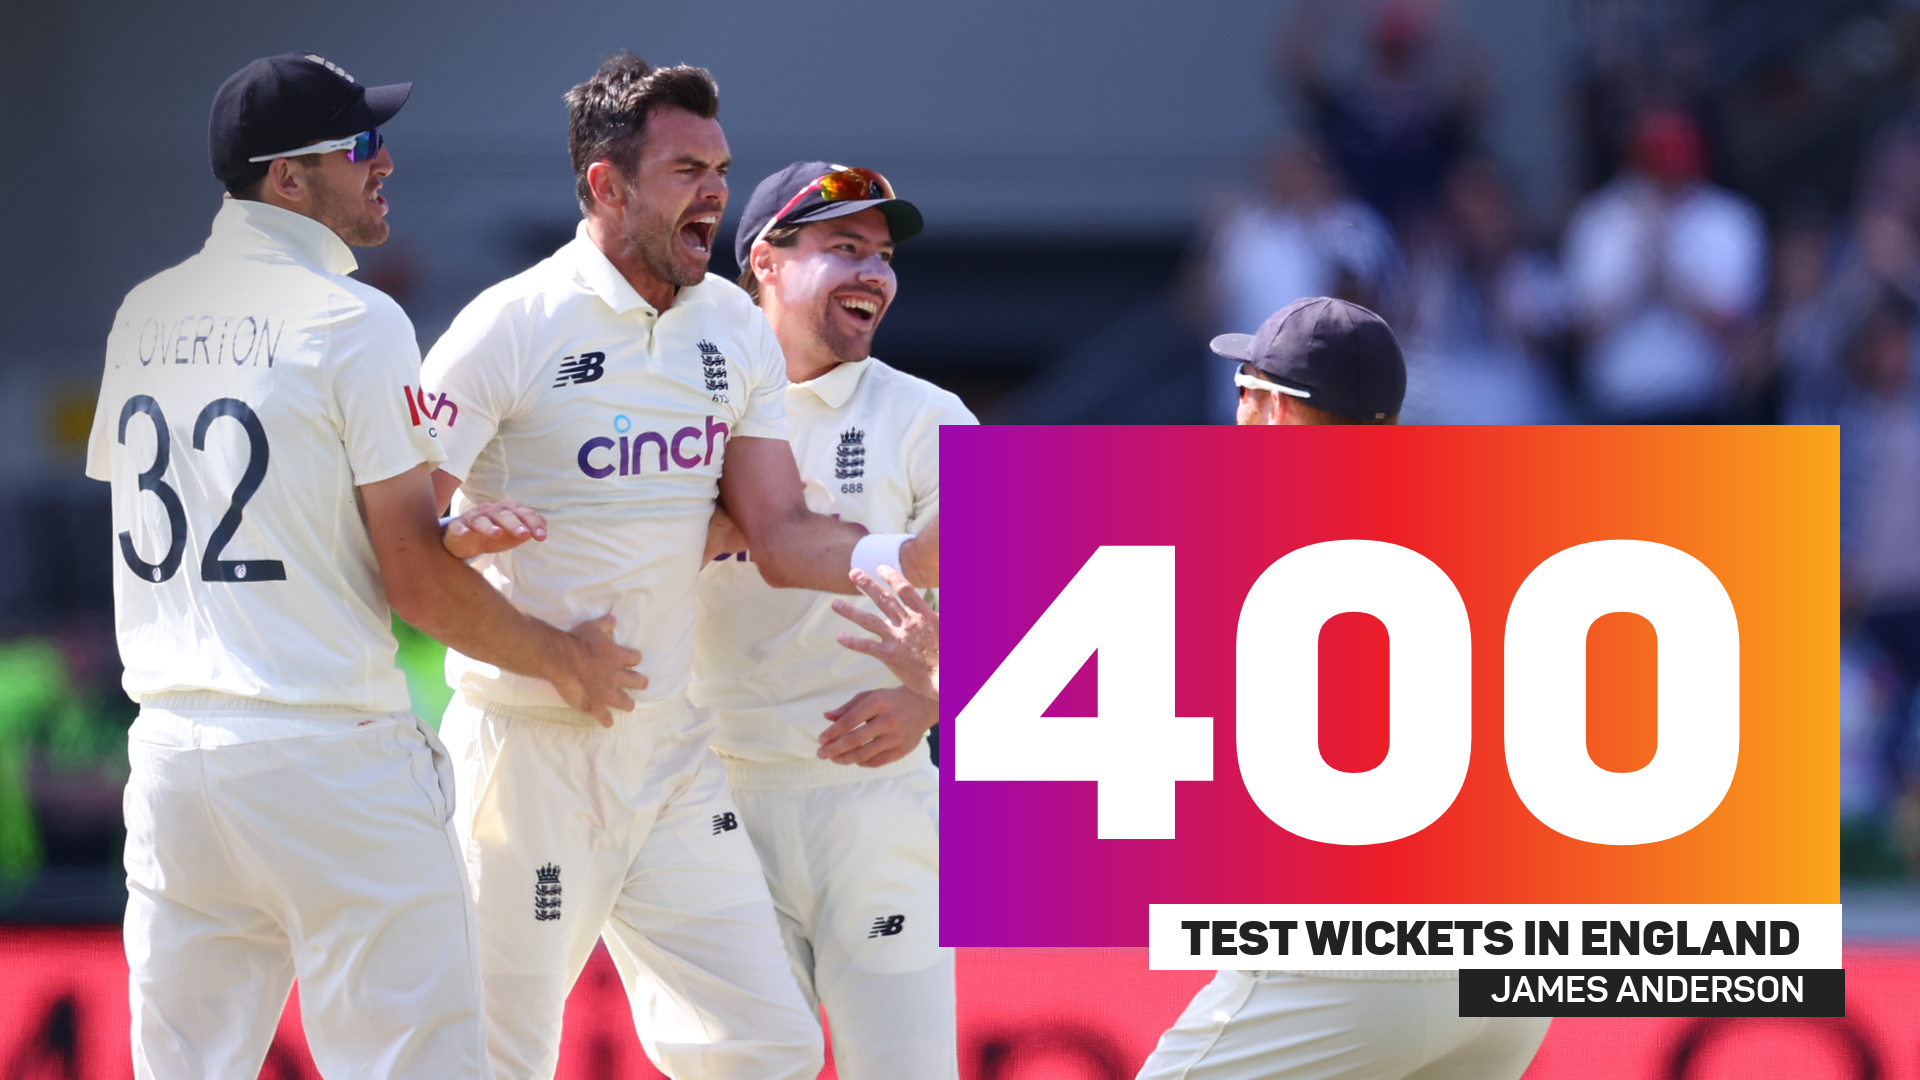 James Anderson has hit another milestone in Test cricket